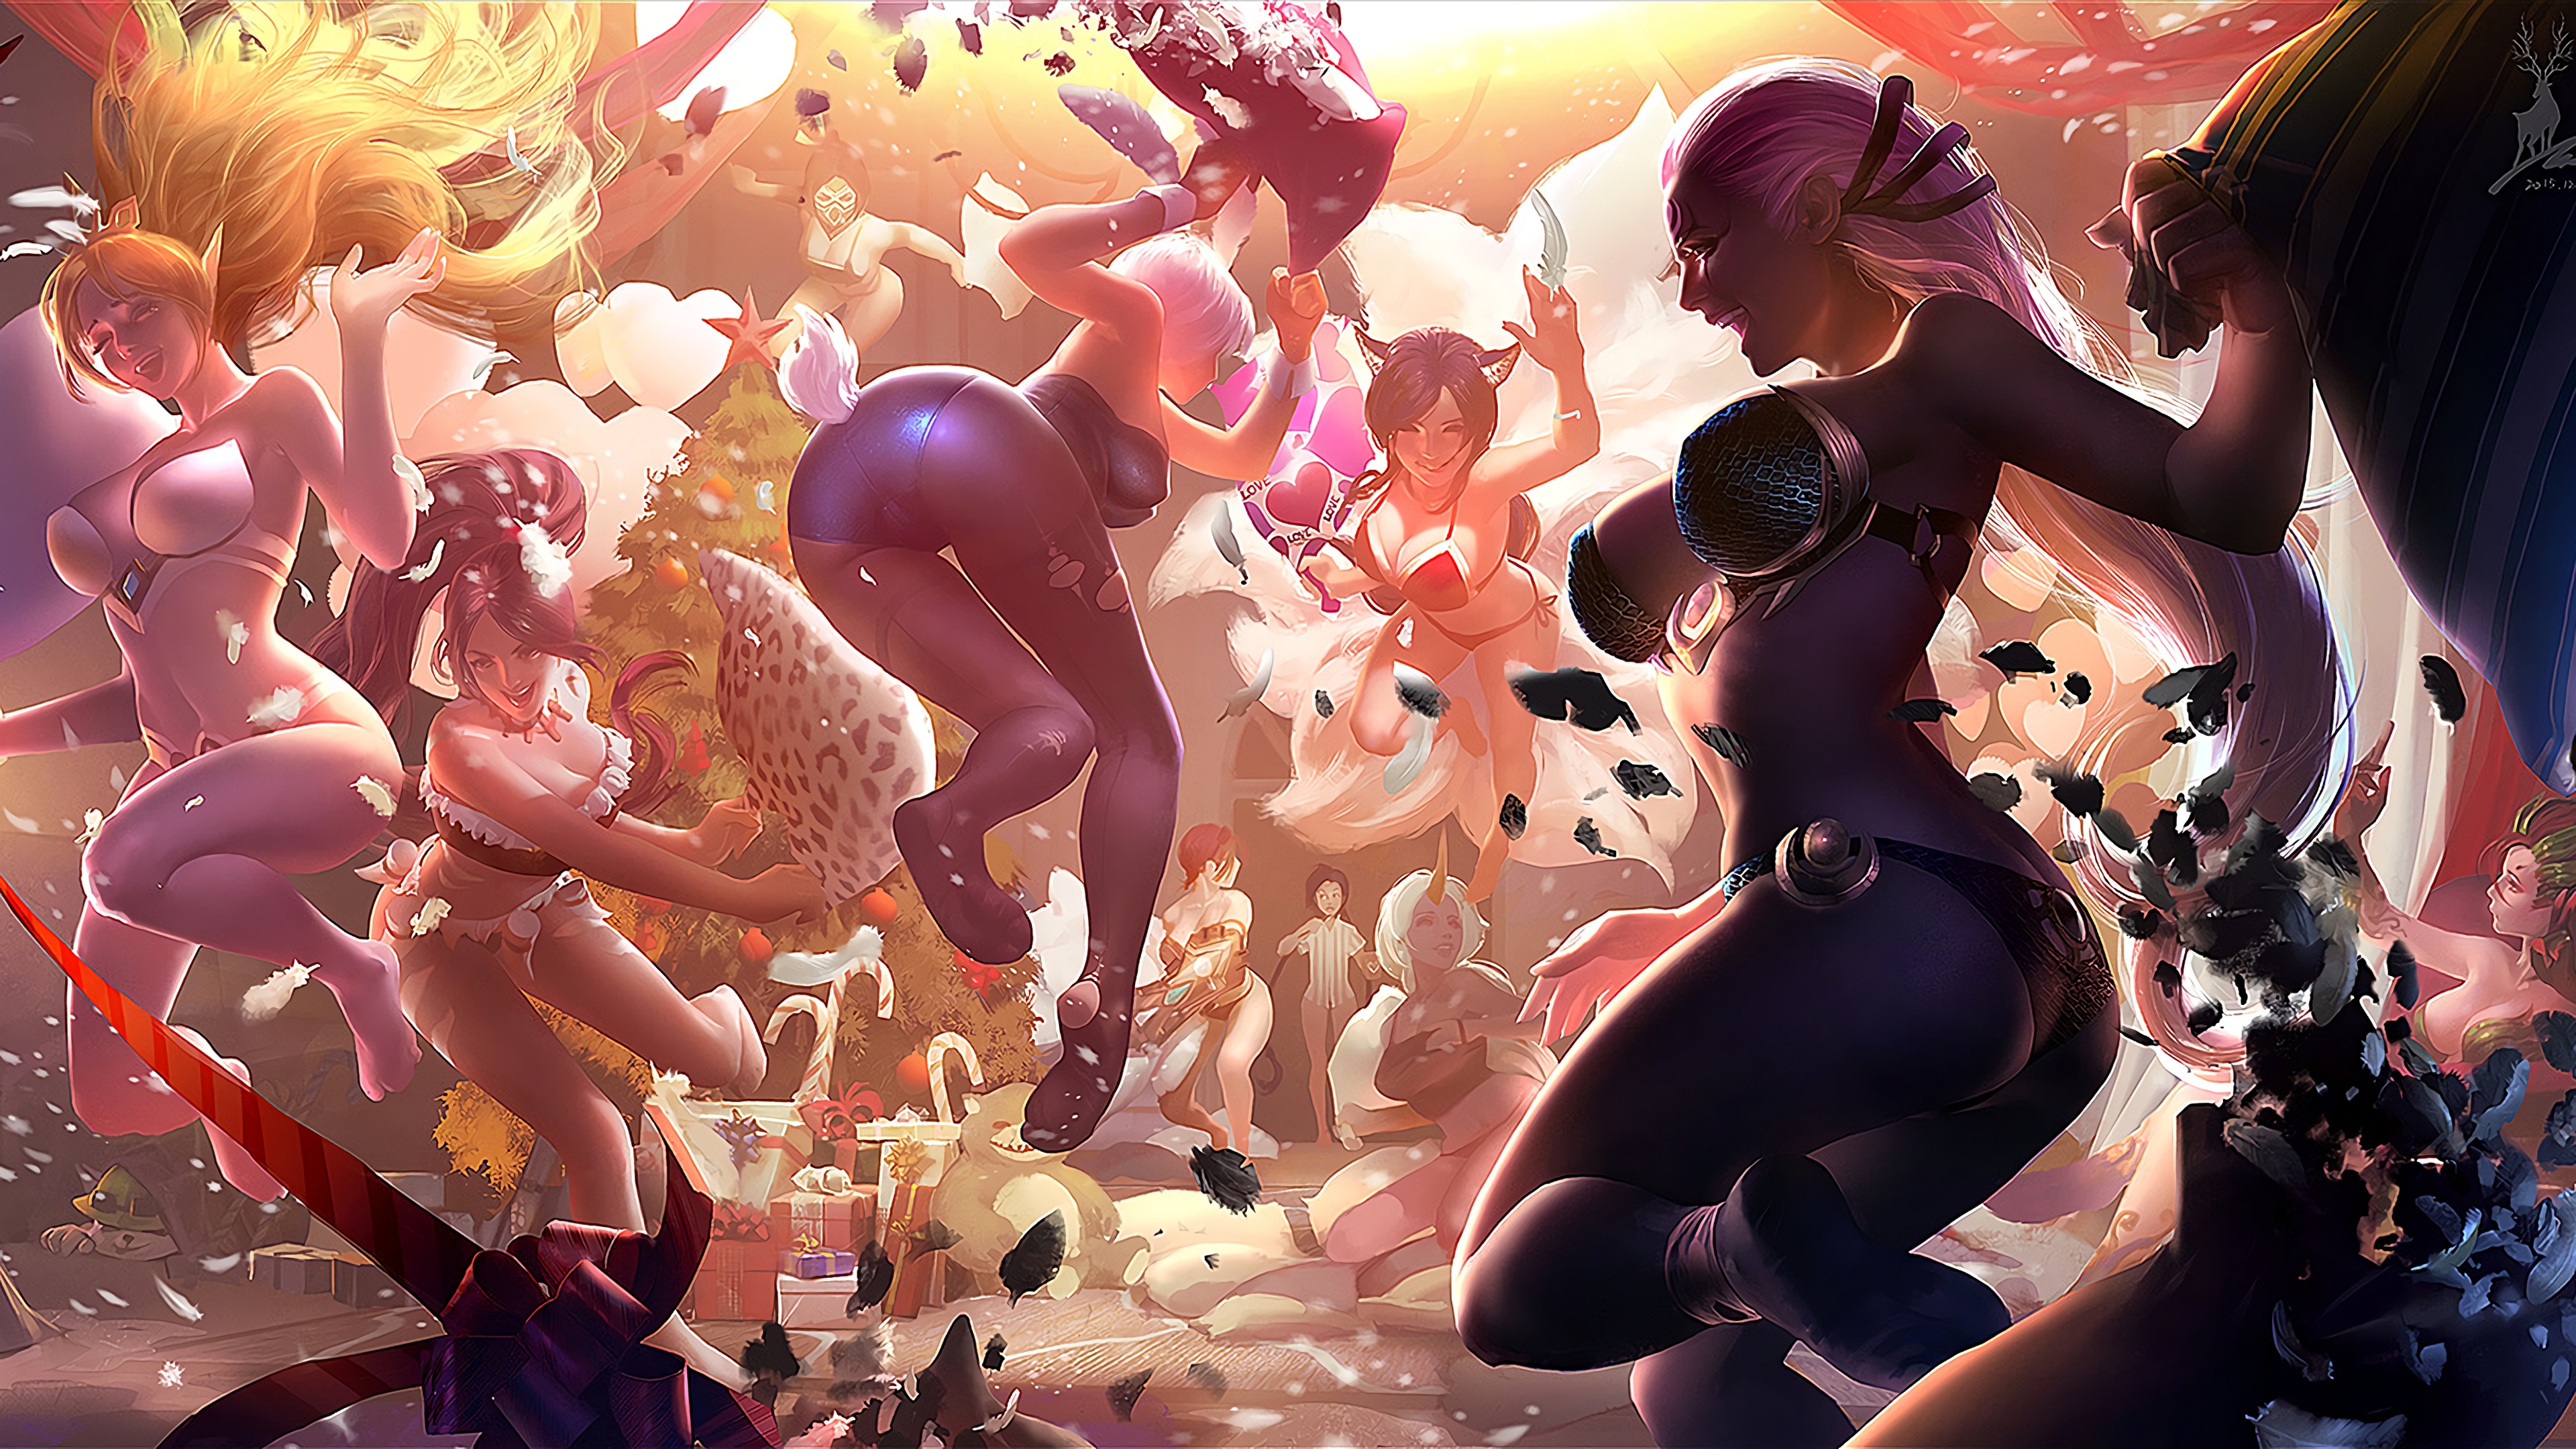 League of Legends Girls Pillow Fight | LoLWallpapers